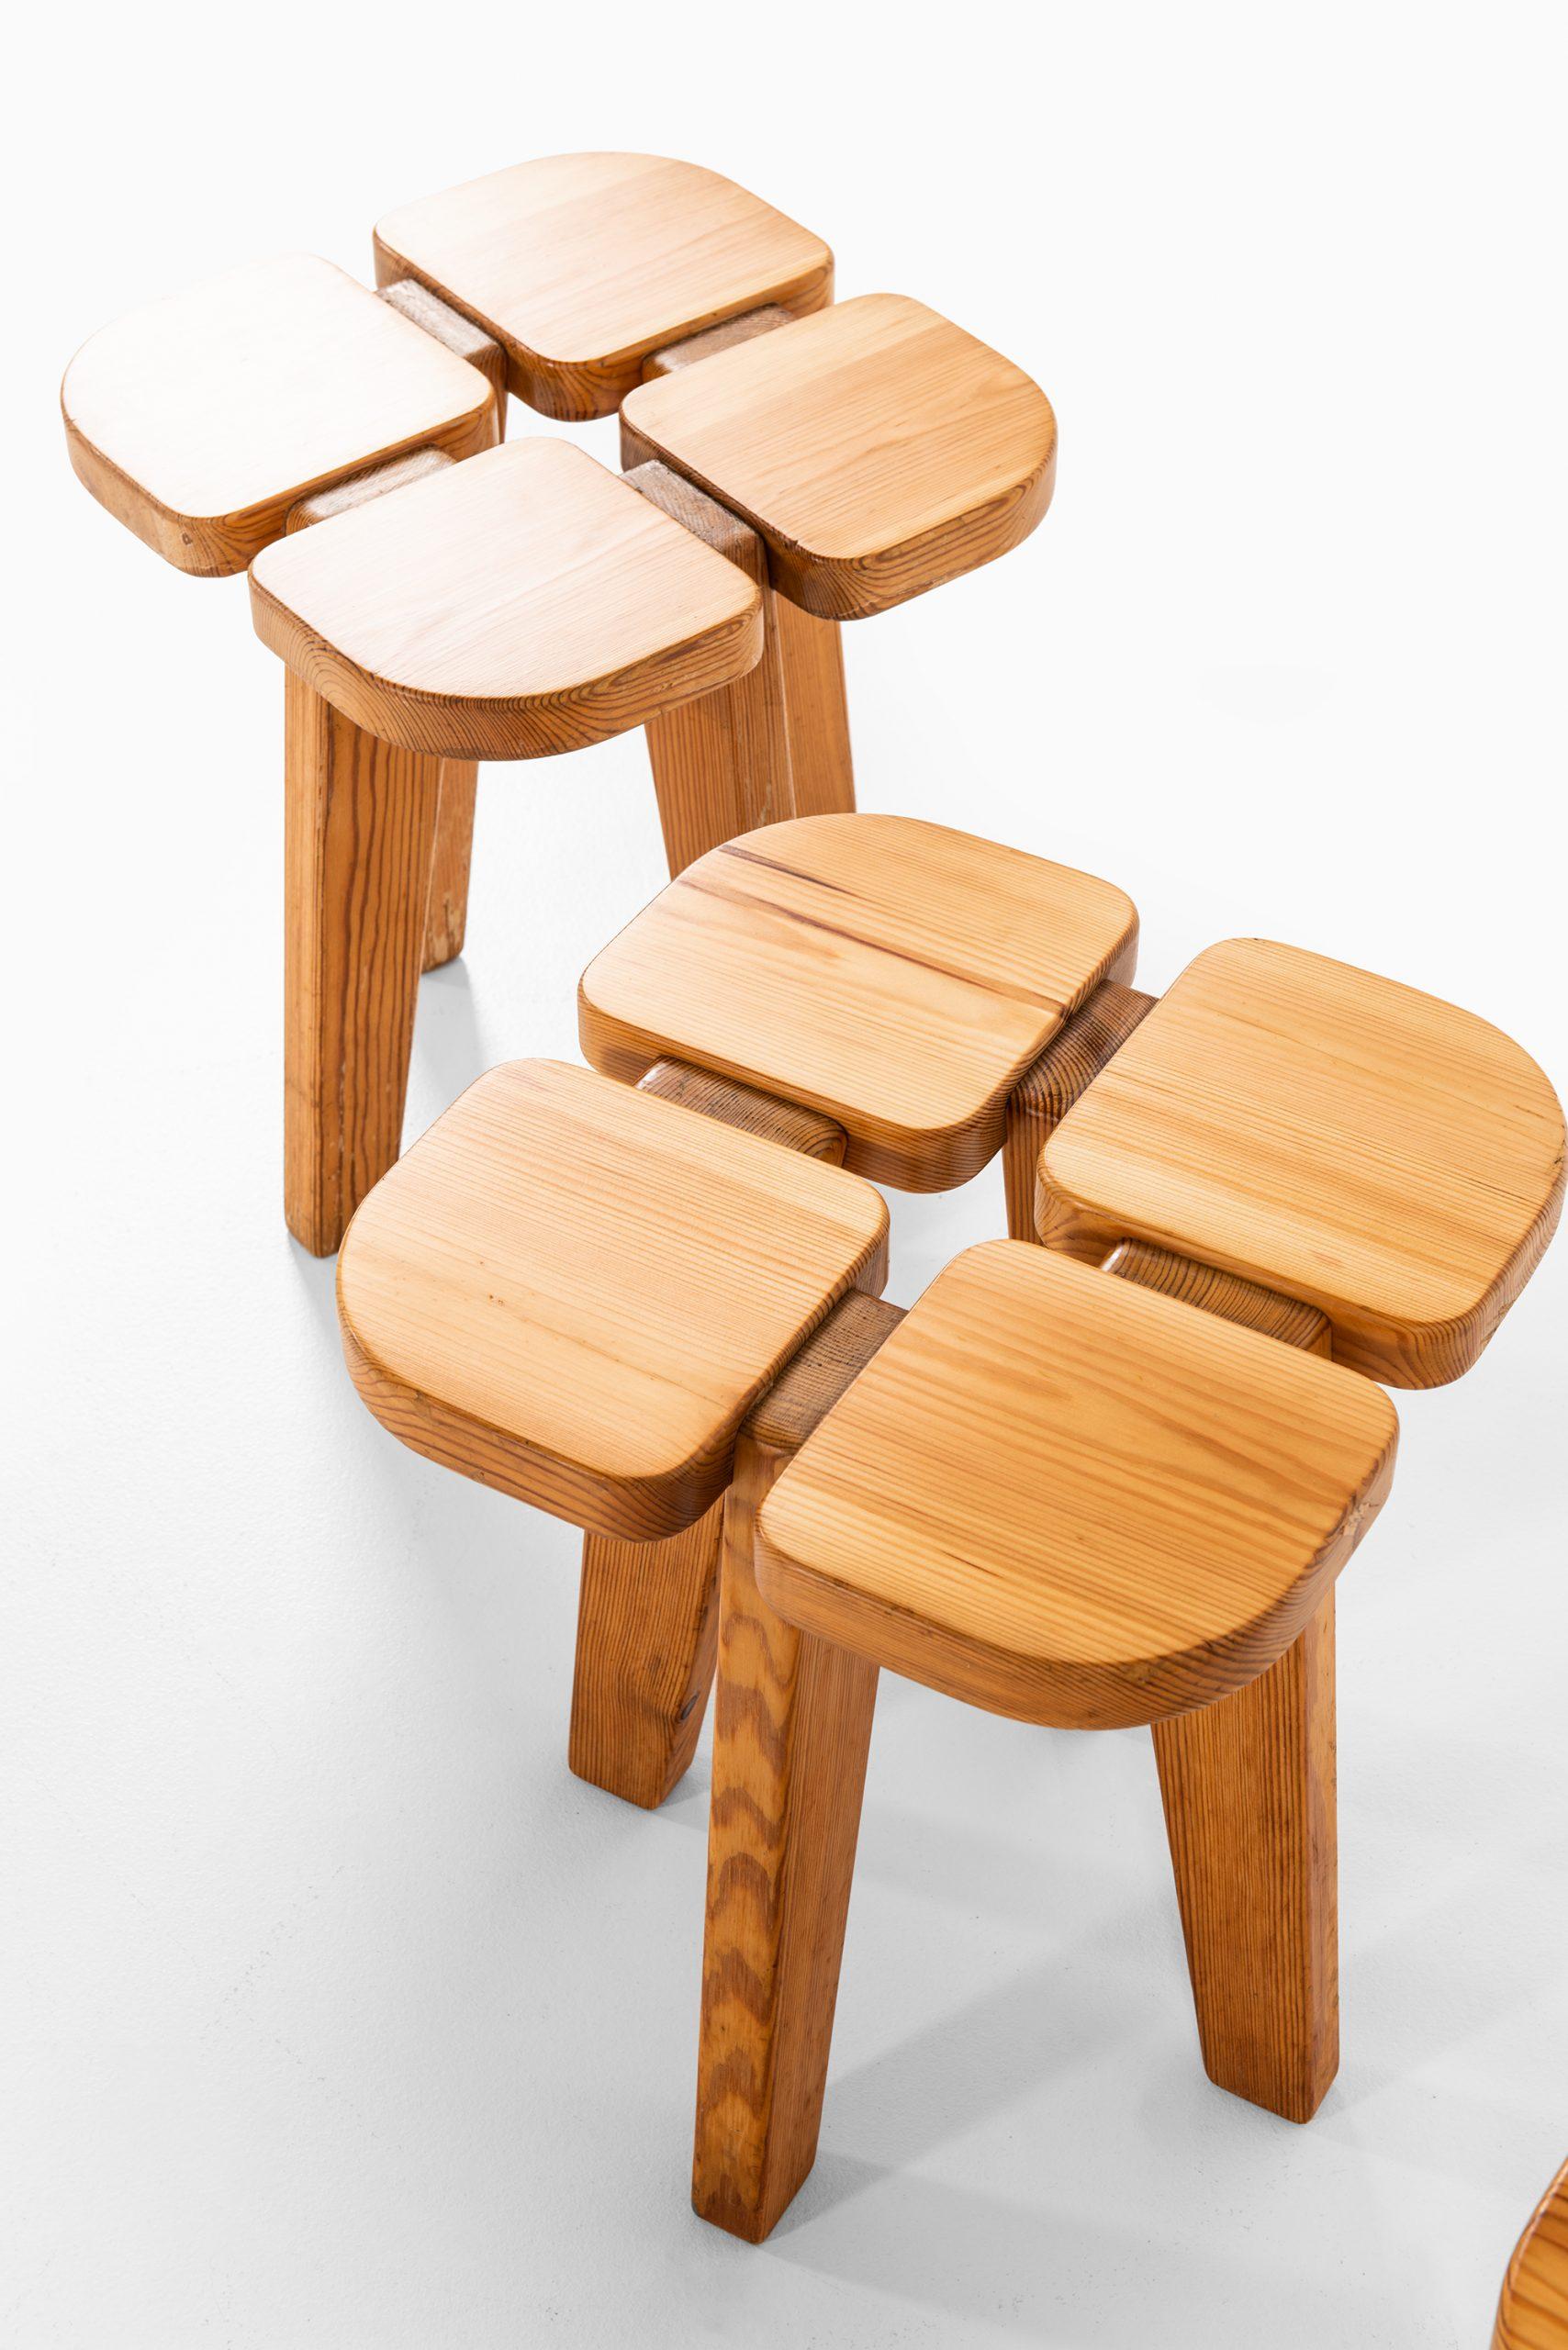 Rare set of 4 stools model Apila designed by Lisa Johansson-Pape. Produced by Stockmann Oy in Finland.
  